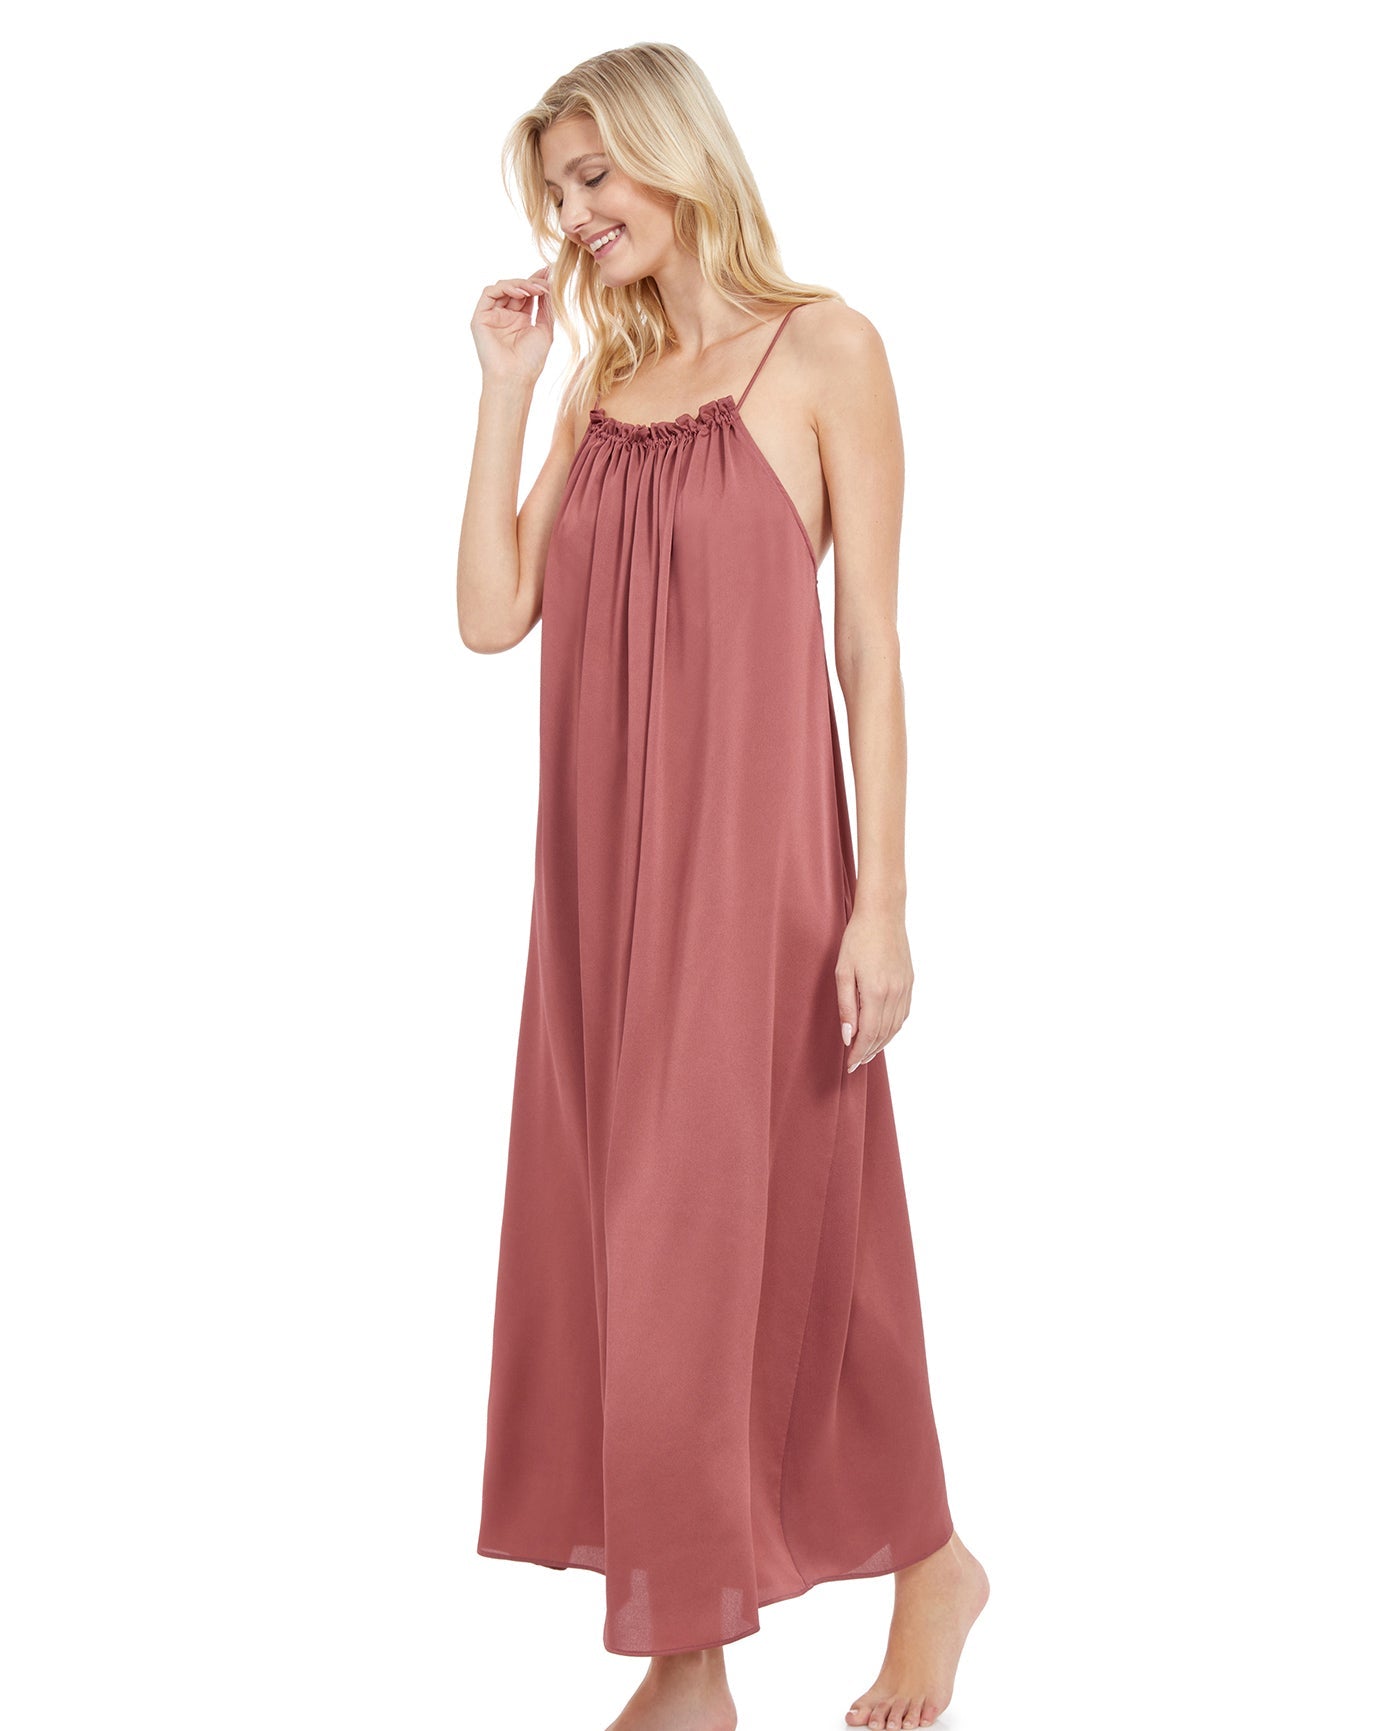 Side View View Of Gottex Classic Queen Of Paradise High Neck Long Cover Up Dress | Gottex Queen Of Paradise Rose Taupe